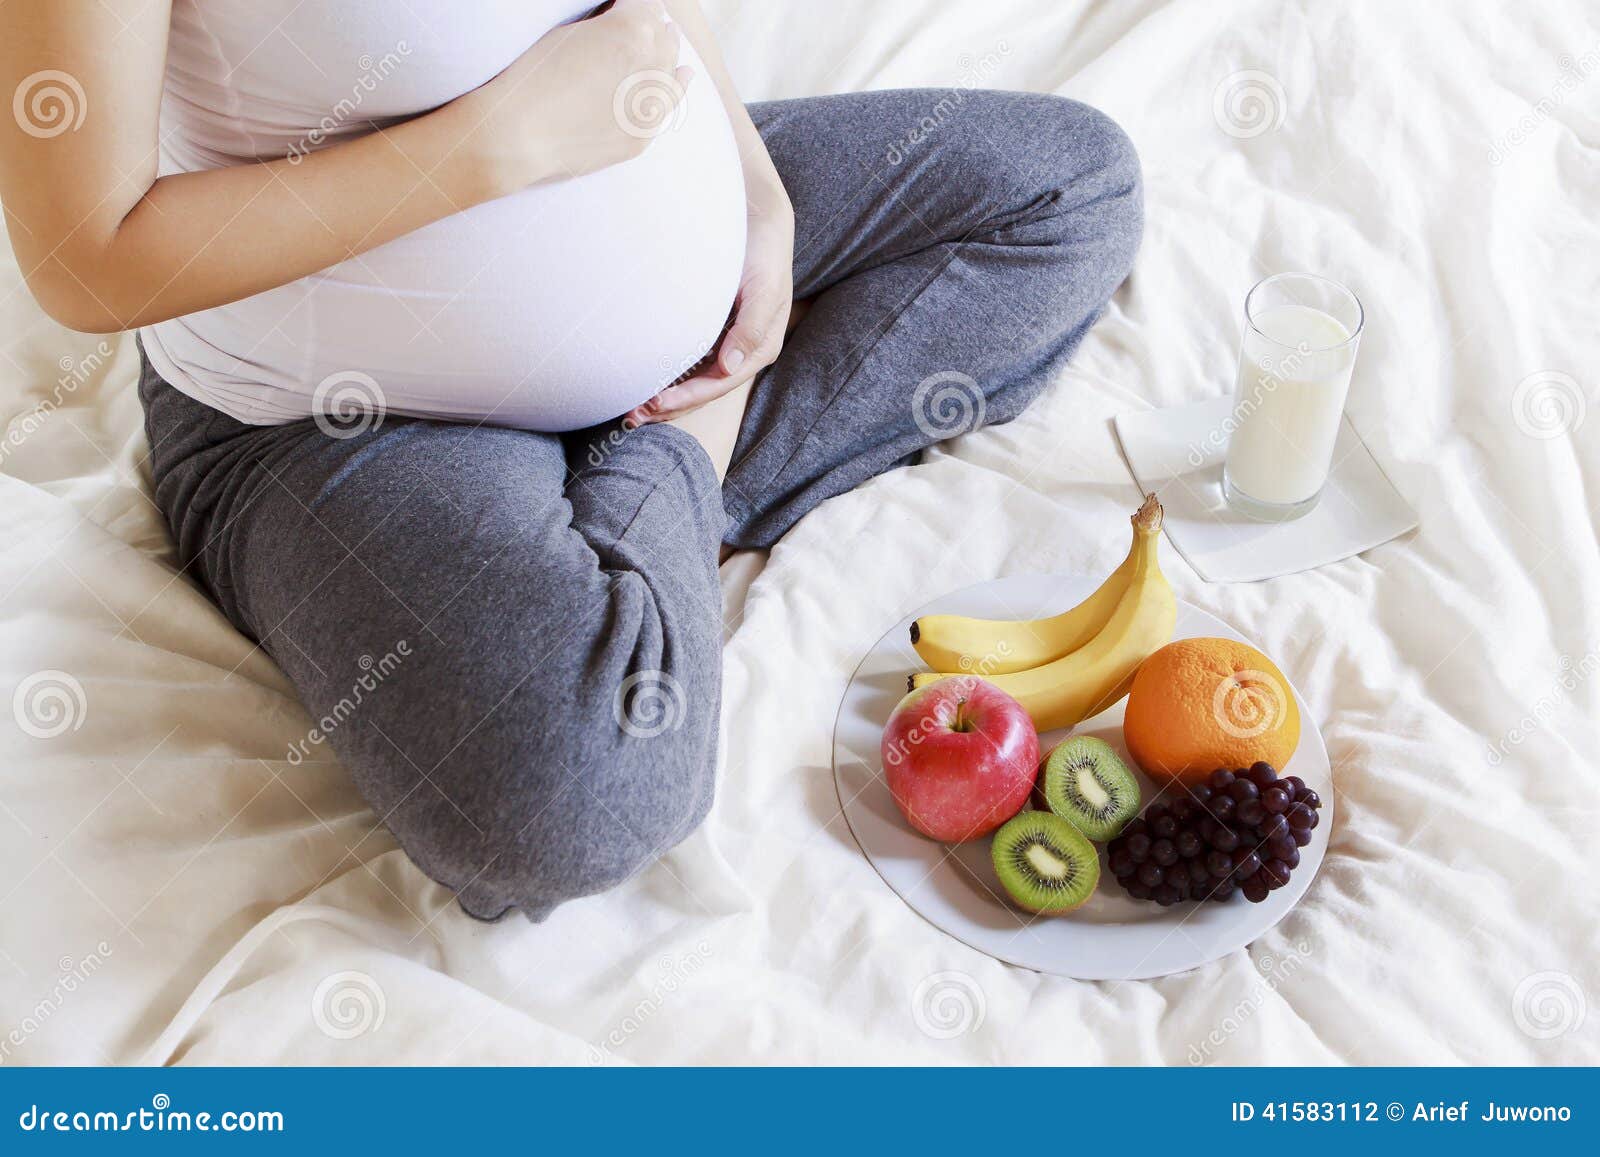 Pregnant Women And Nutrition 71